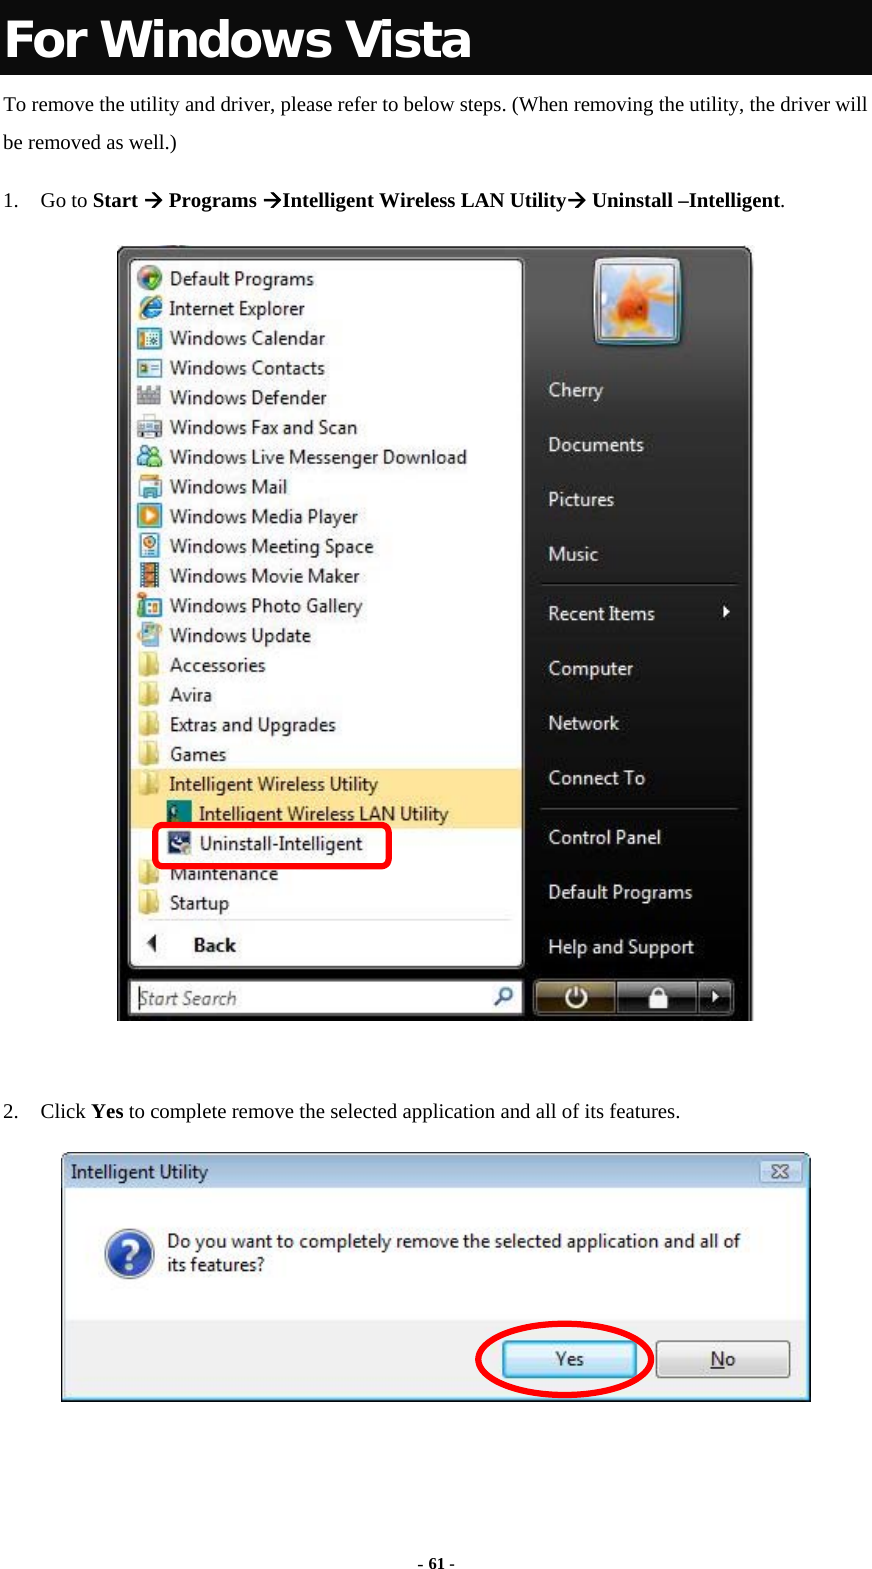  - 61 - For Windows Vista To remove the utility and driver, please refer to below steps. (When removing the utility, the driver will be removed as well.) 1. Go to Start  Programs Intelligent Wireless LAN Utility Uninstall –Intelligent.   2. Click Yes to complete remove the selected application and all of its features.   